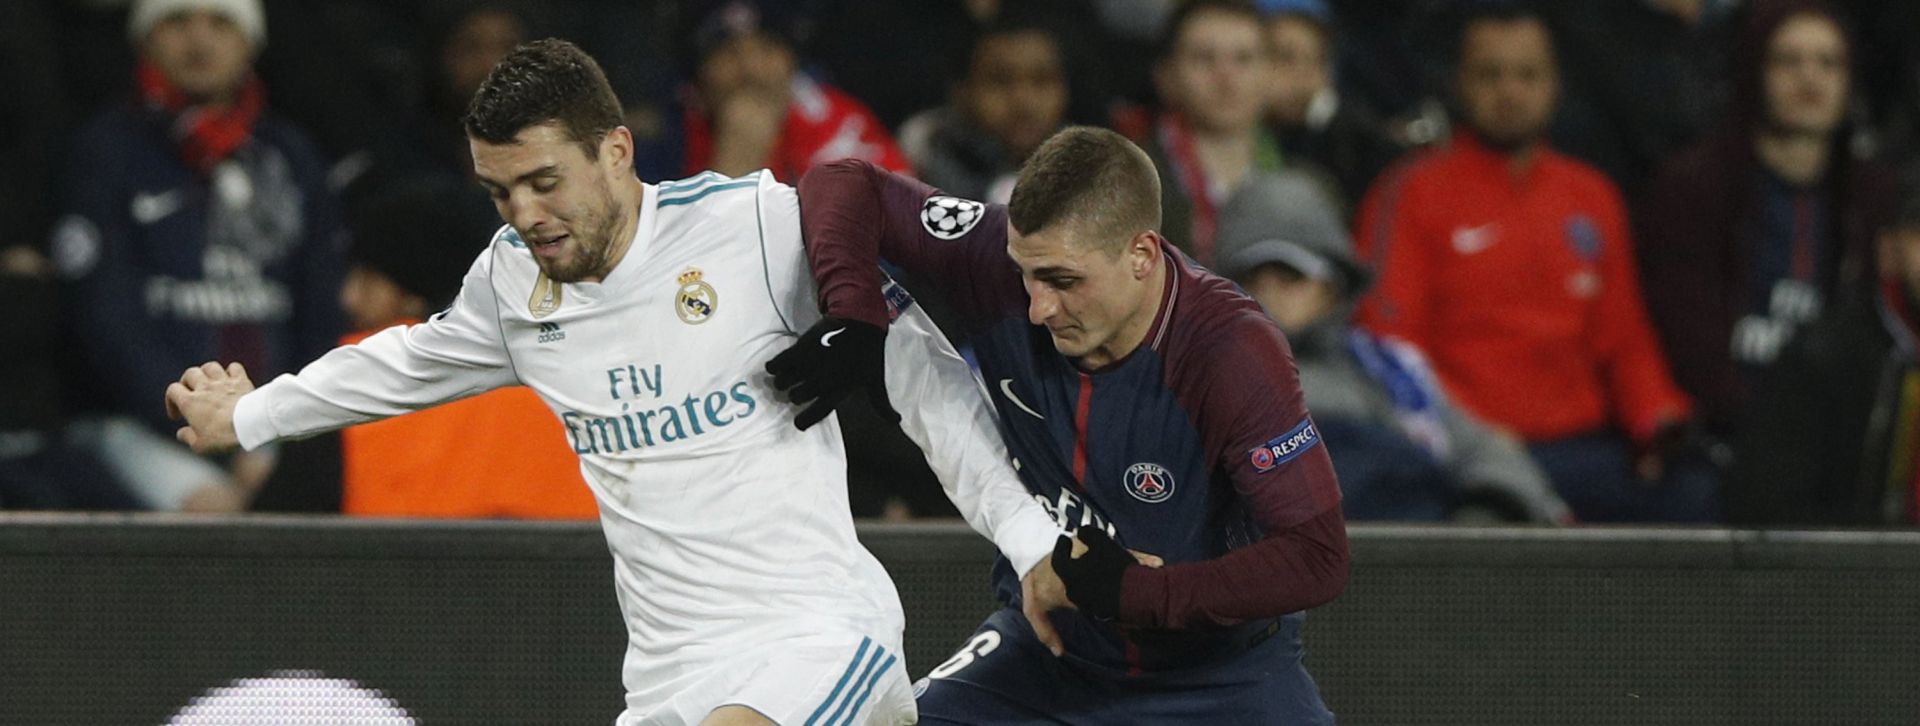 epa06585540 Paris Saint Germain's Marco Verratti (R) and Real Madrid's Mateo Kovacic (L) in action during the UEFA Champions League round of 16, second leg soccer match between Paris Saint Germain and Real Madrid, in Paris, France, 06 March 2018.  EPA/YOAN VALAT